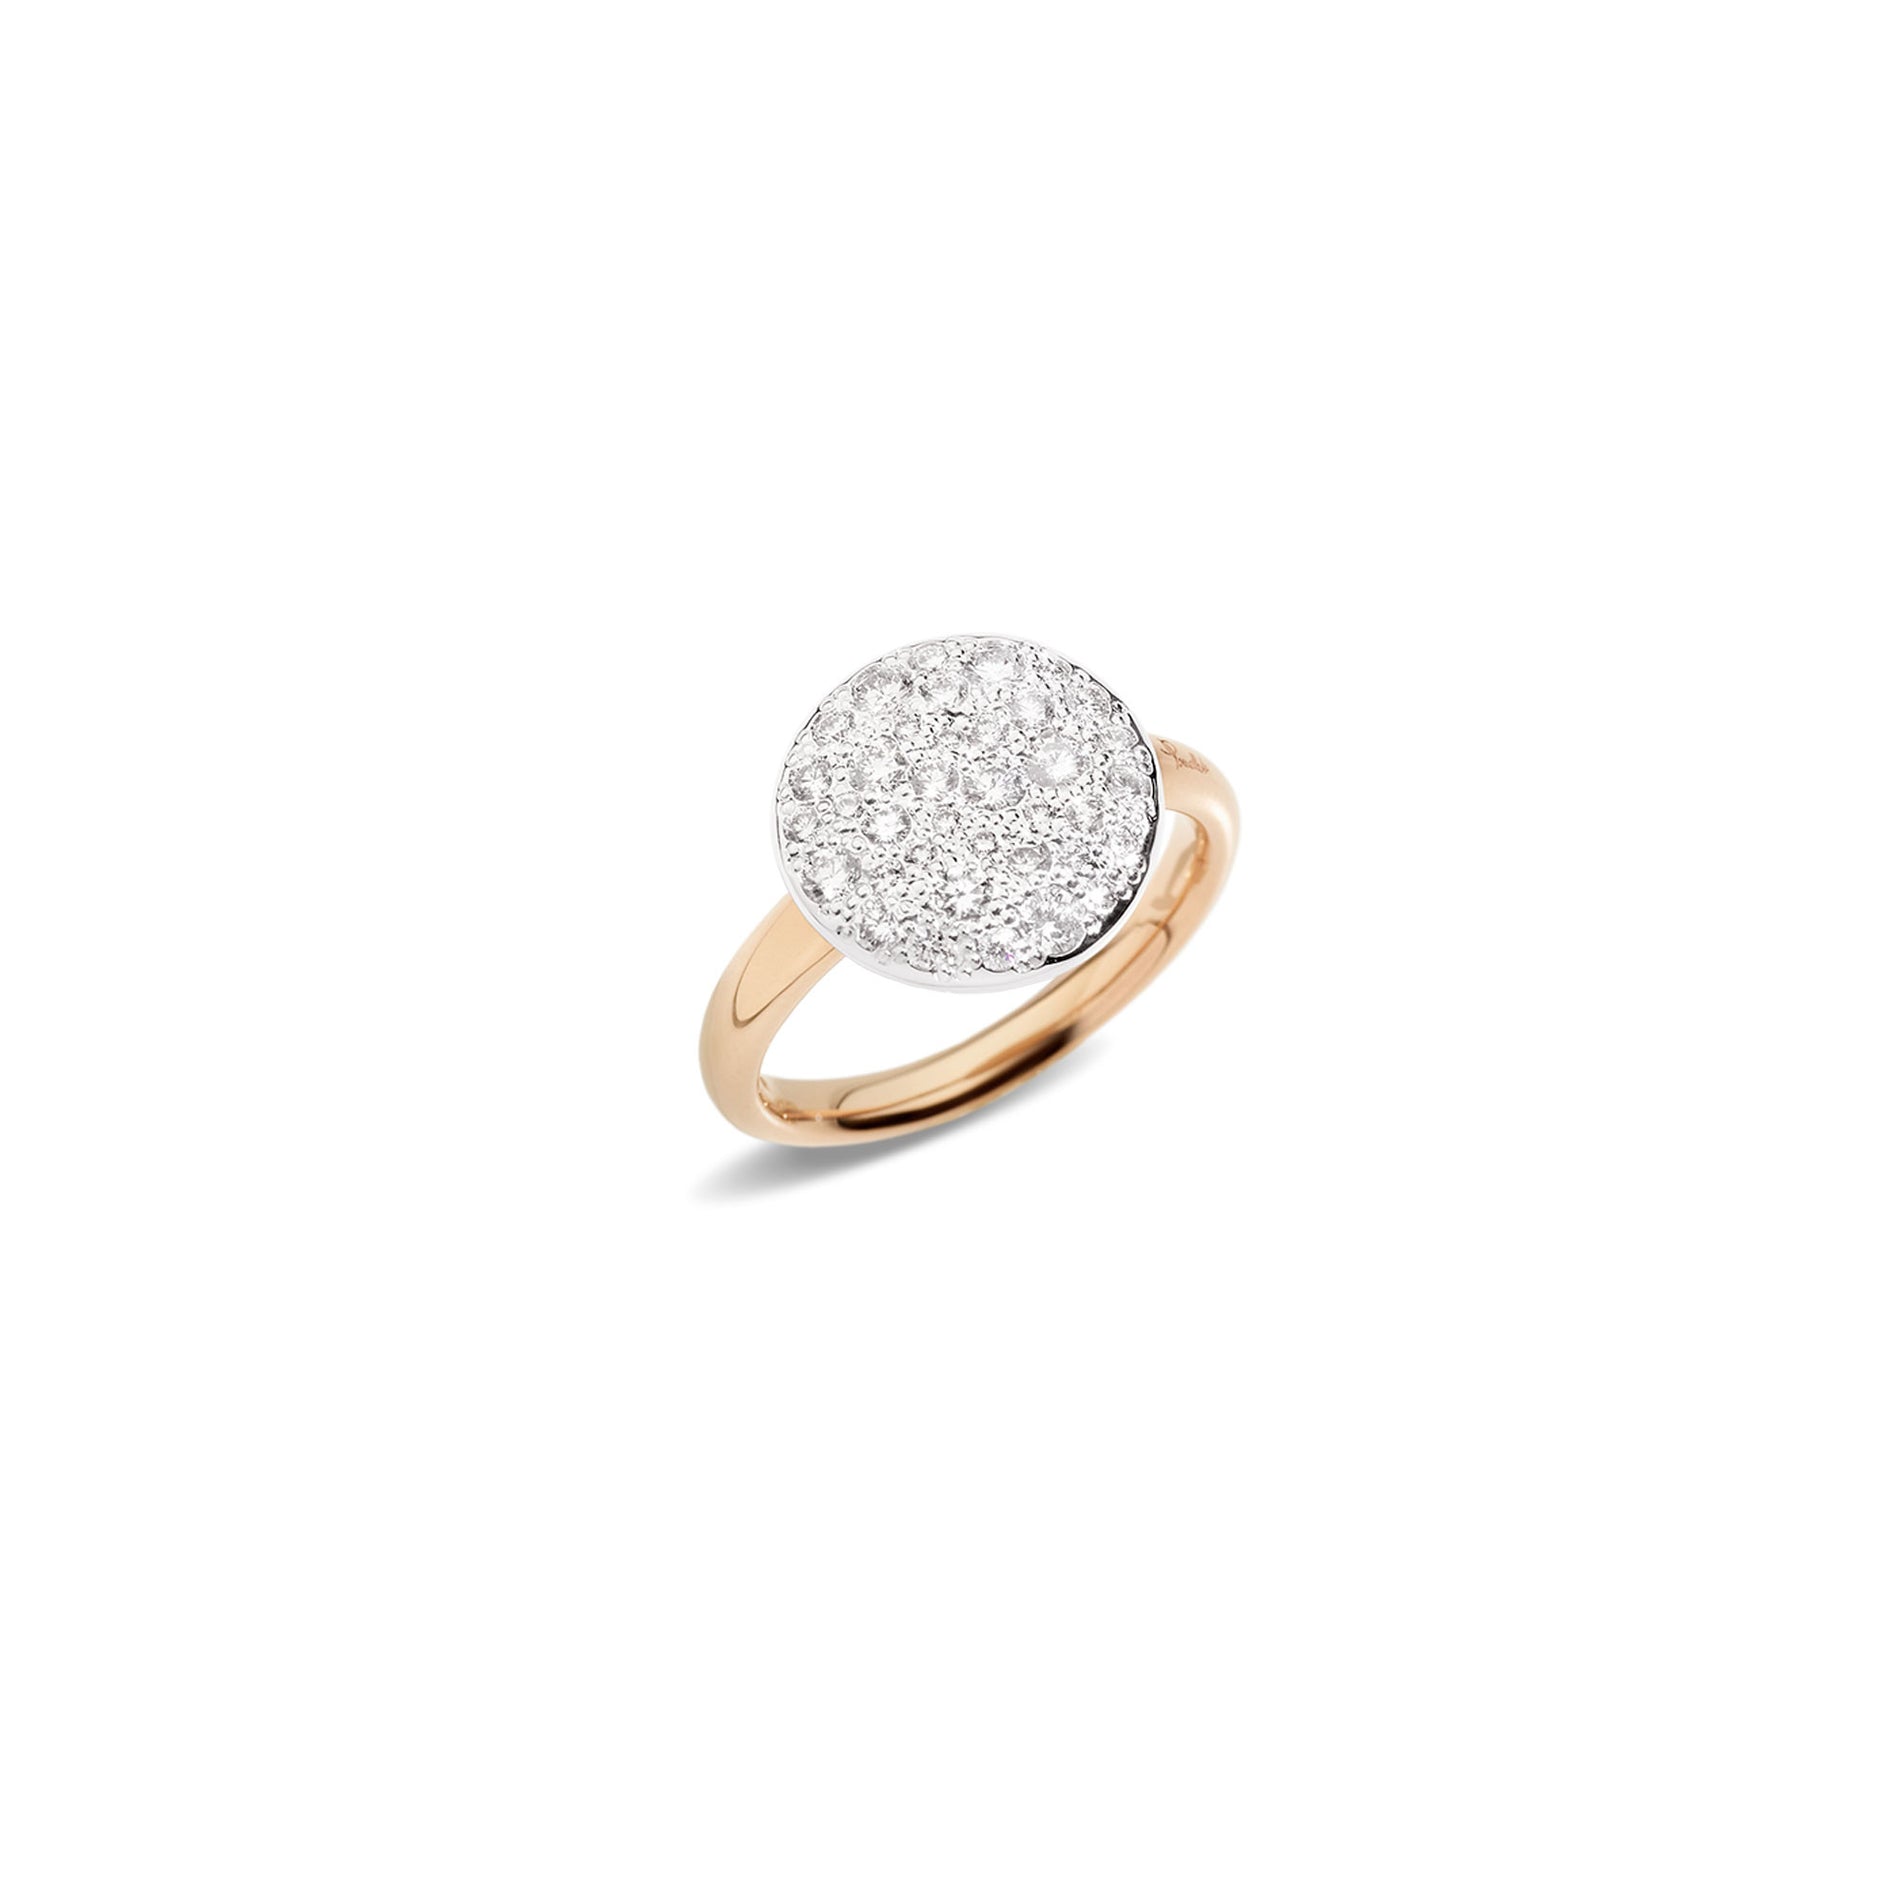 Sabbia Ring in 18k Rose Gold with White Pave Diamonds large - Orsini Jewellers NZ